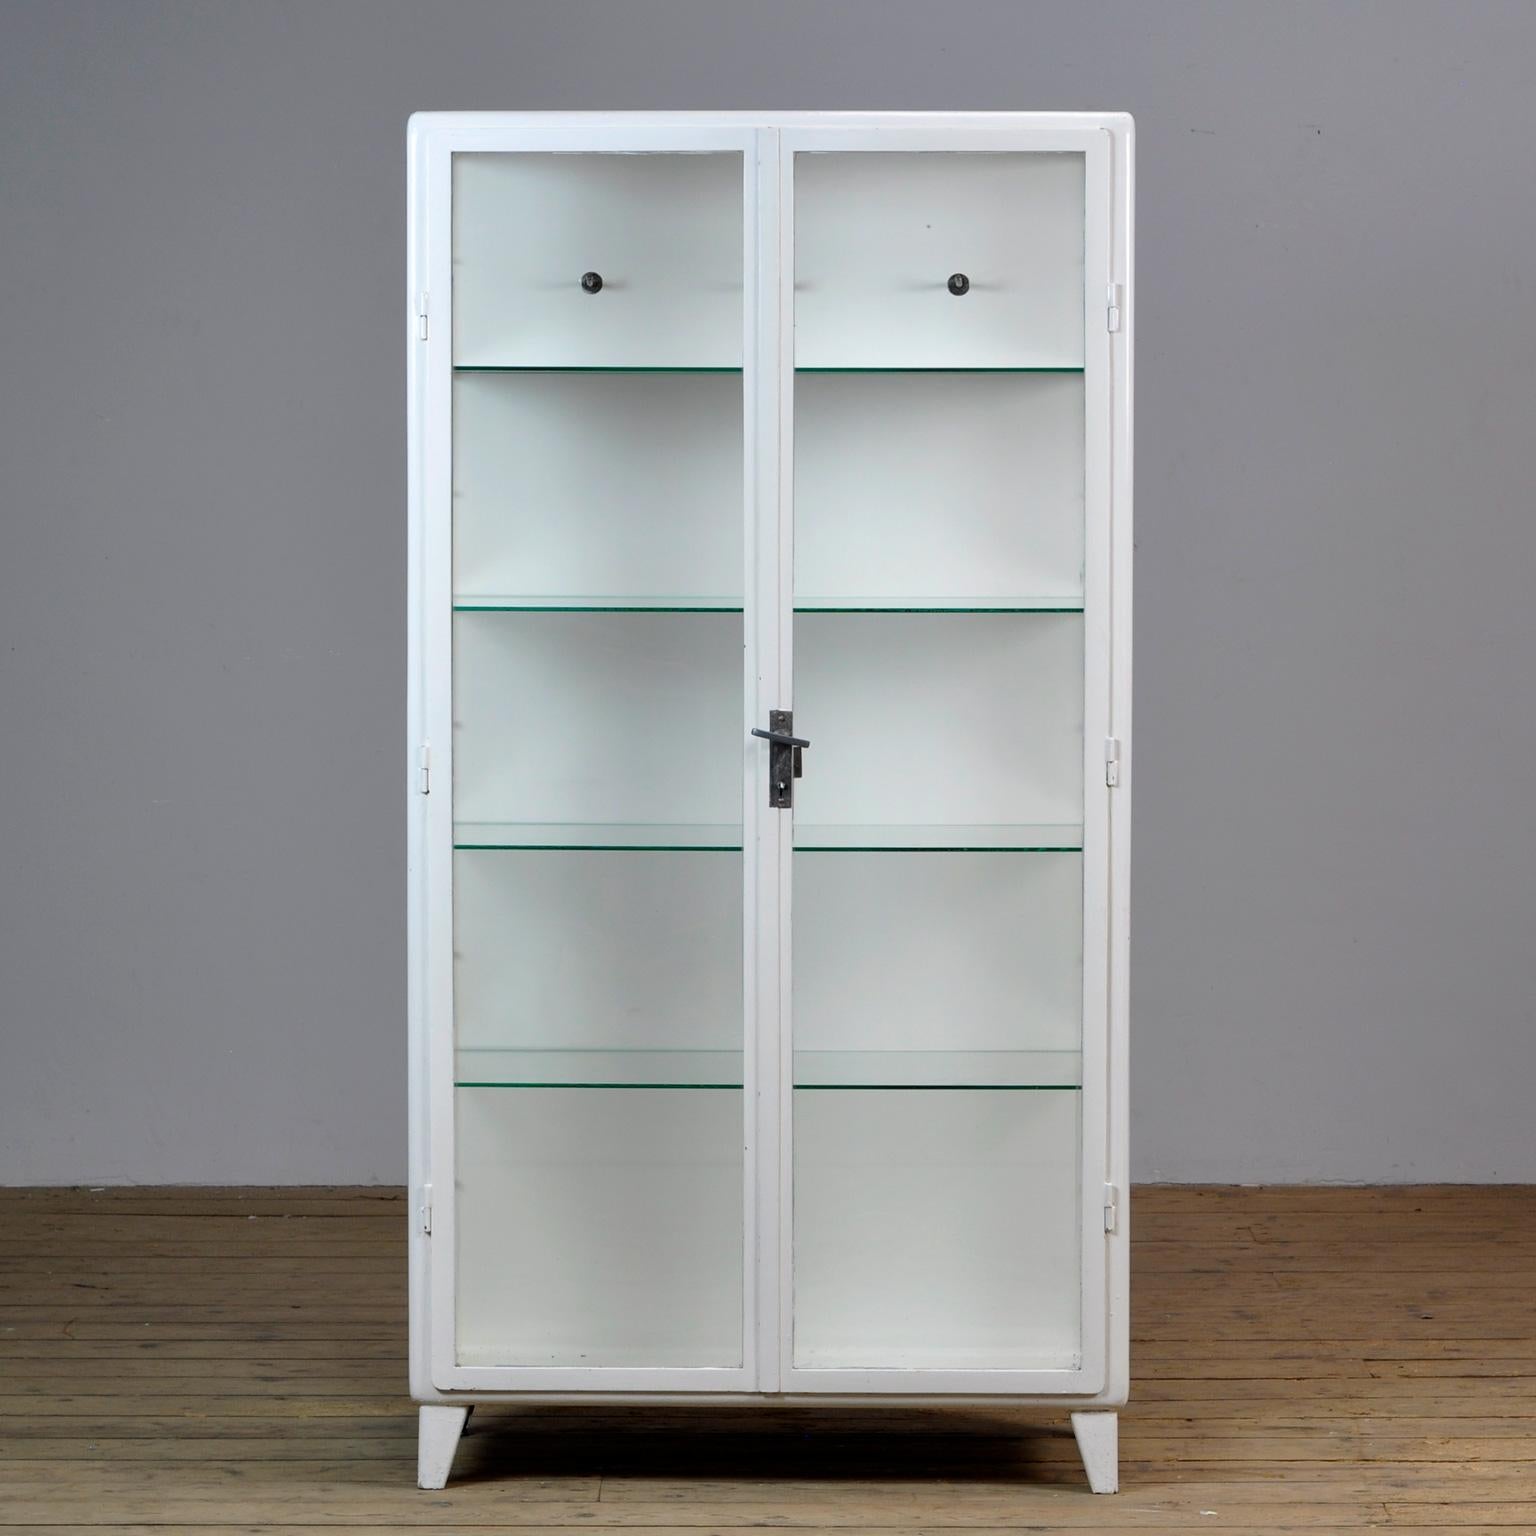 Polish medical cabinet, produced in the 1960's. Made of iron and the original antique glass. Elegant design with rounded corners. On the inside three clothes hooks and 4 glass shelves. 